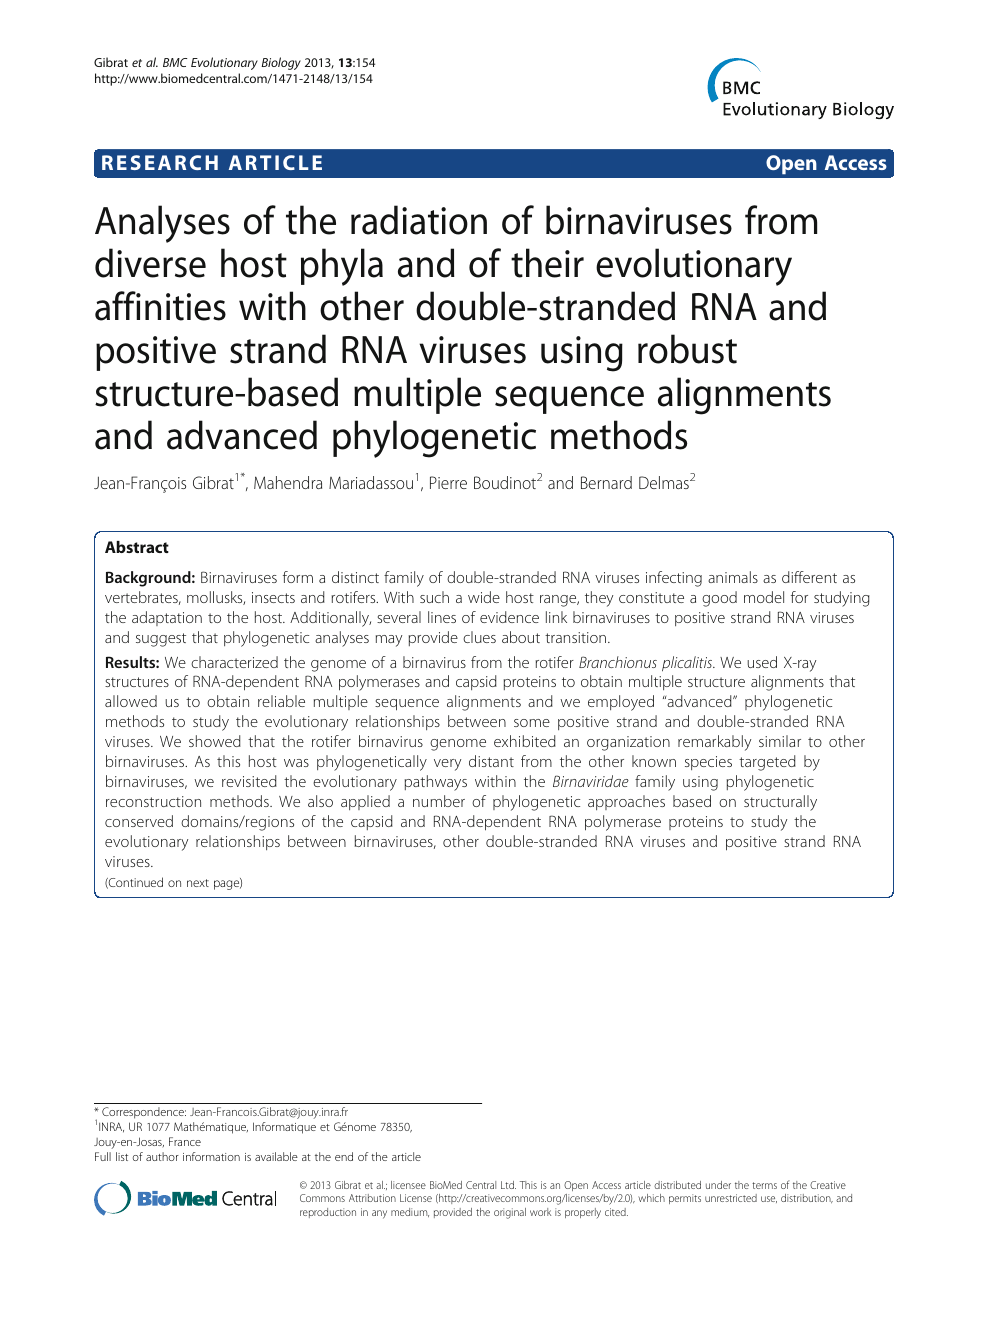 Analyses Of The Radiation Of Birnaviruses From Diverse Host Phyla And Of Their Evolutionary Affinities With Other Double Stranded Rna And Positive Strand Rna Viruses Using Robust Structure Based Multiple Sequence Alignments And Advanced